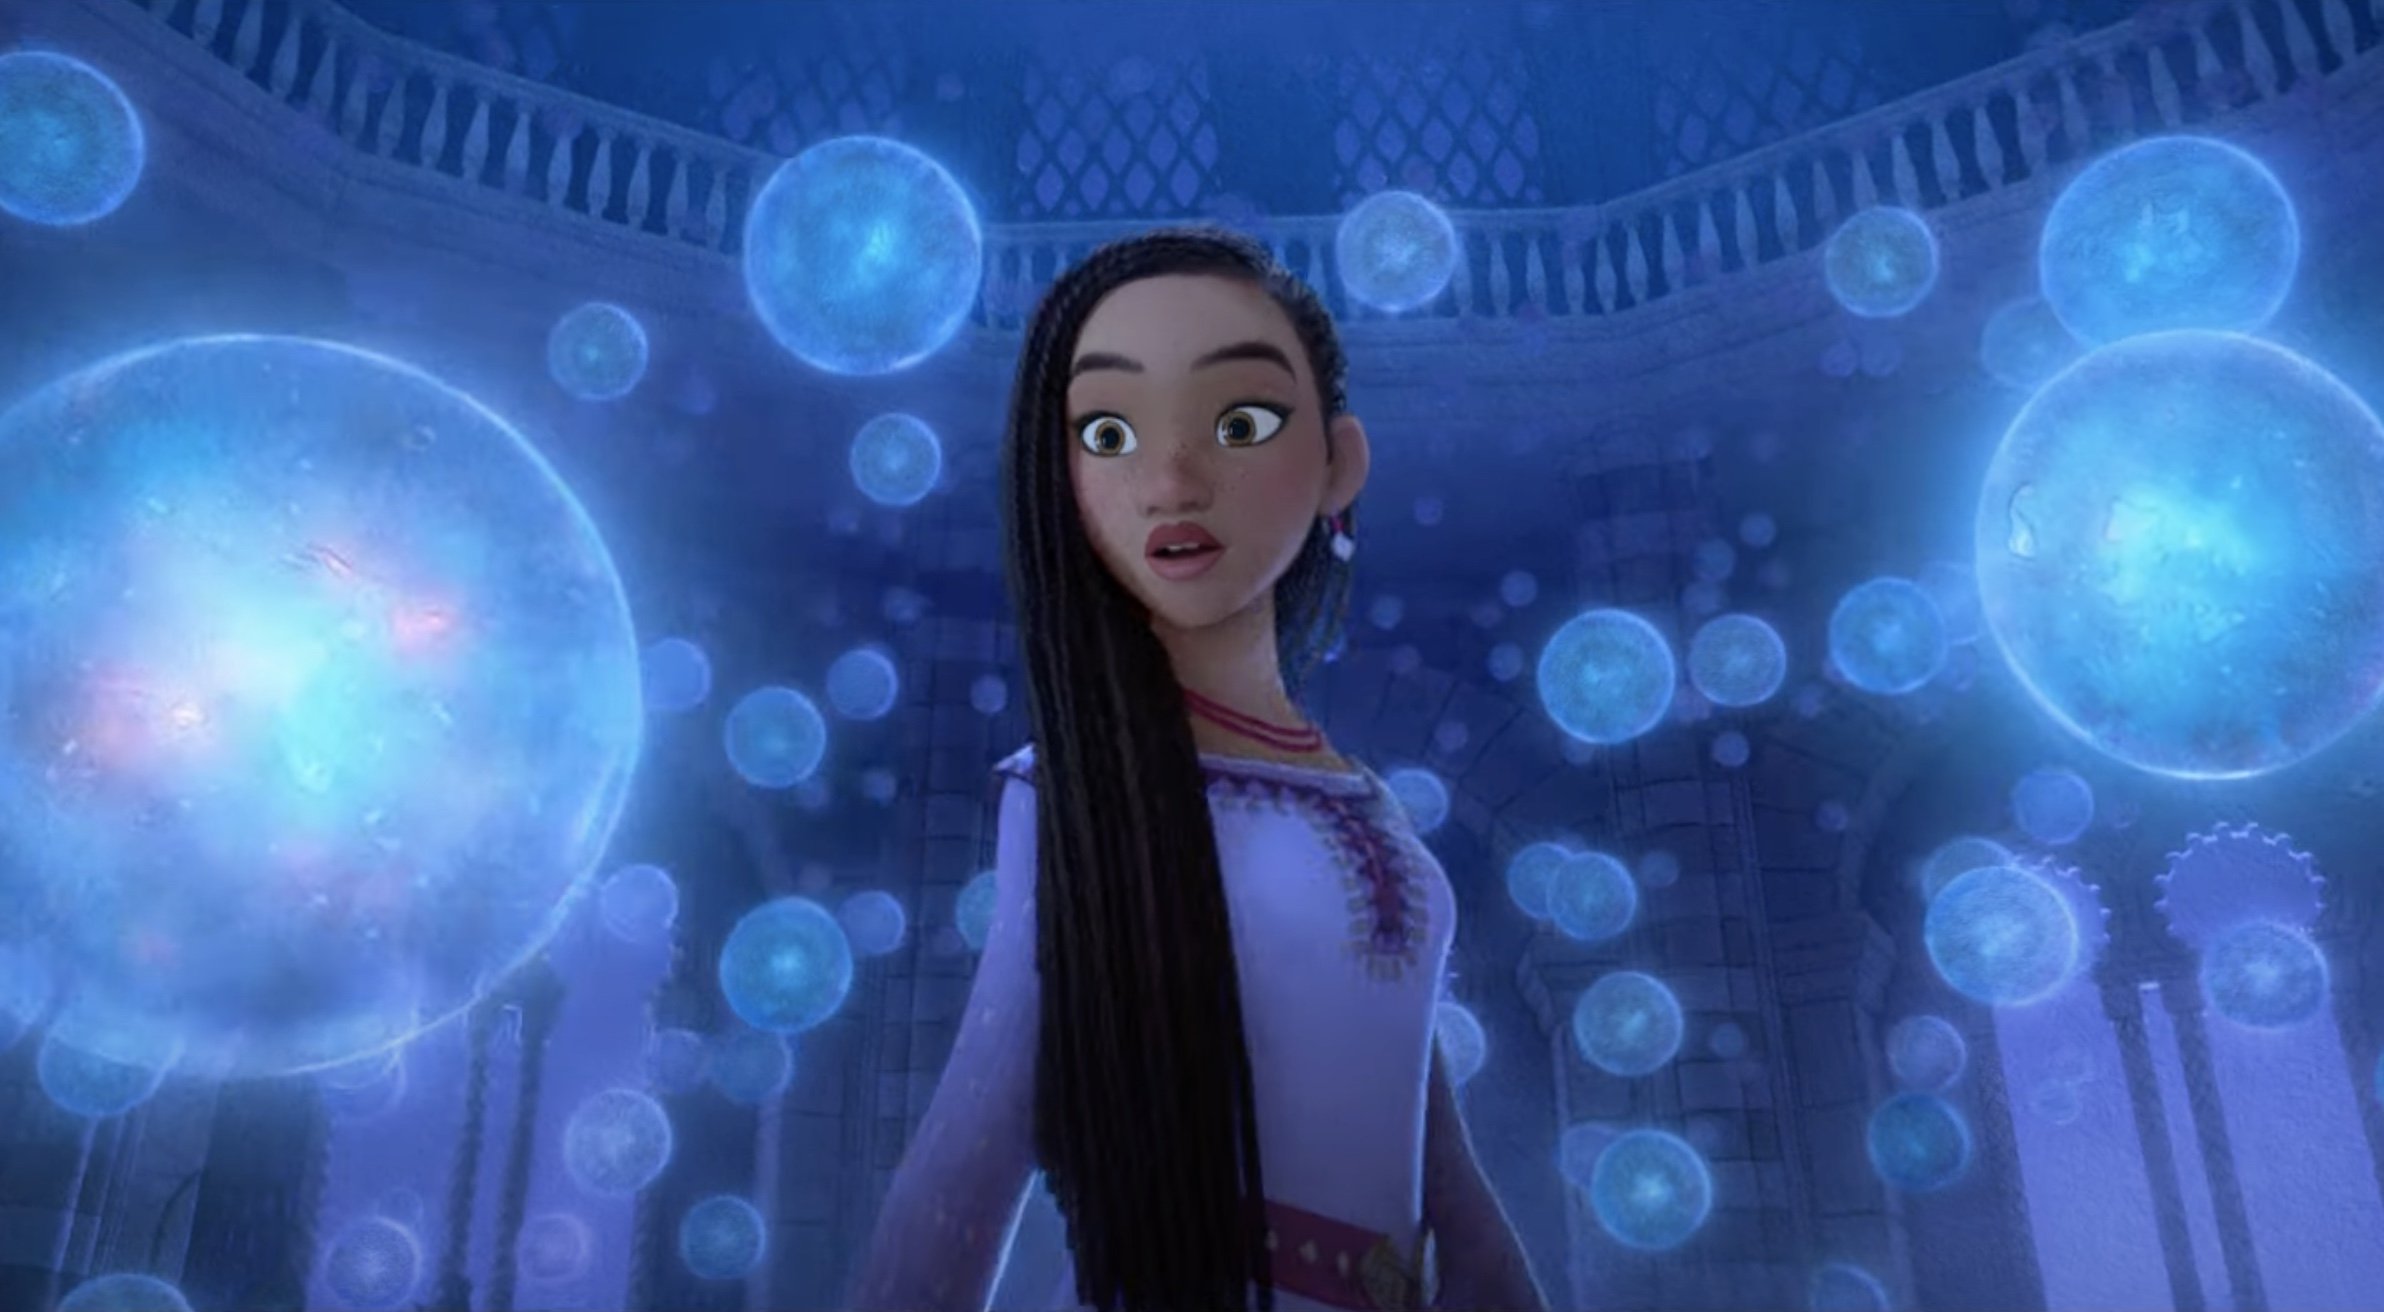 Magical Trailer for Disney's Animated Film WISH, Inspired by the Disney